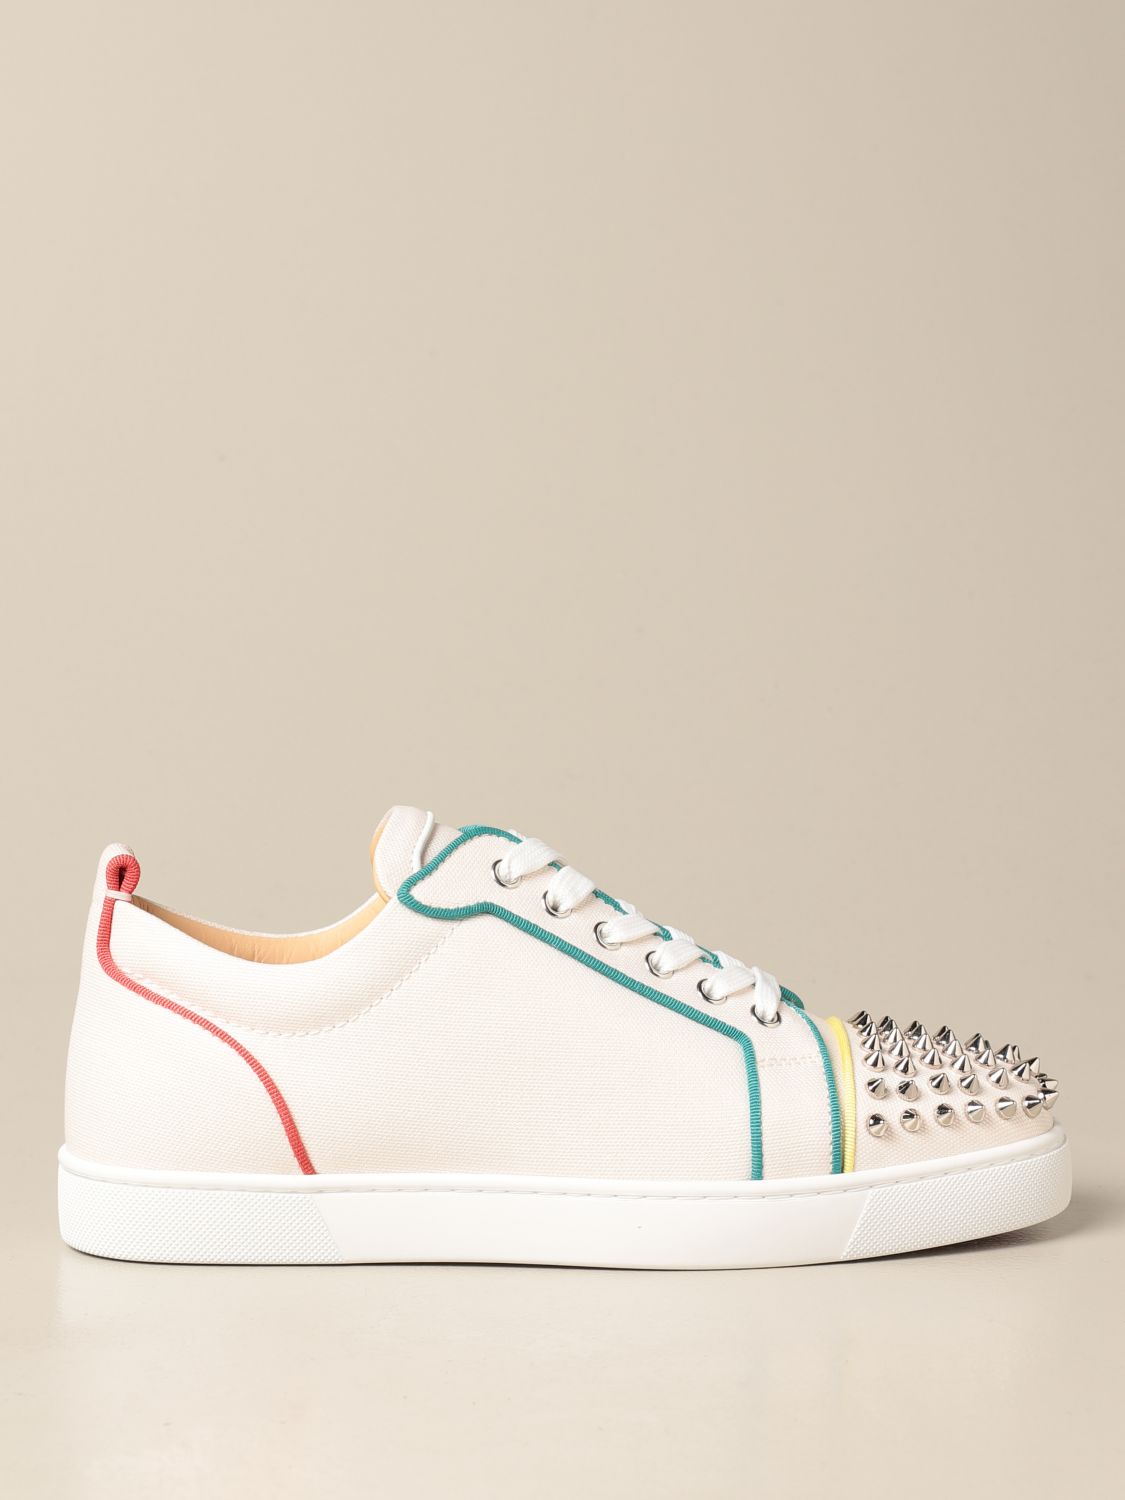  Christian Louboutin Men's White and Beige Woven Louis Junior  Spikes Sneakers (us_Footwear_Size_System, Adult, Men, Numeric, Medium,  Numeric_7)